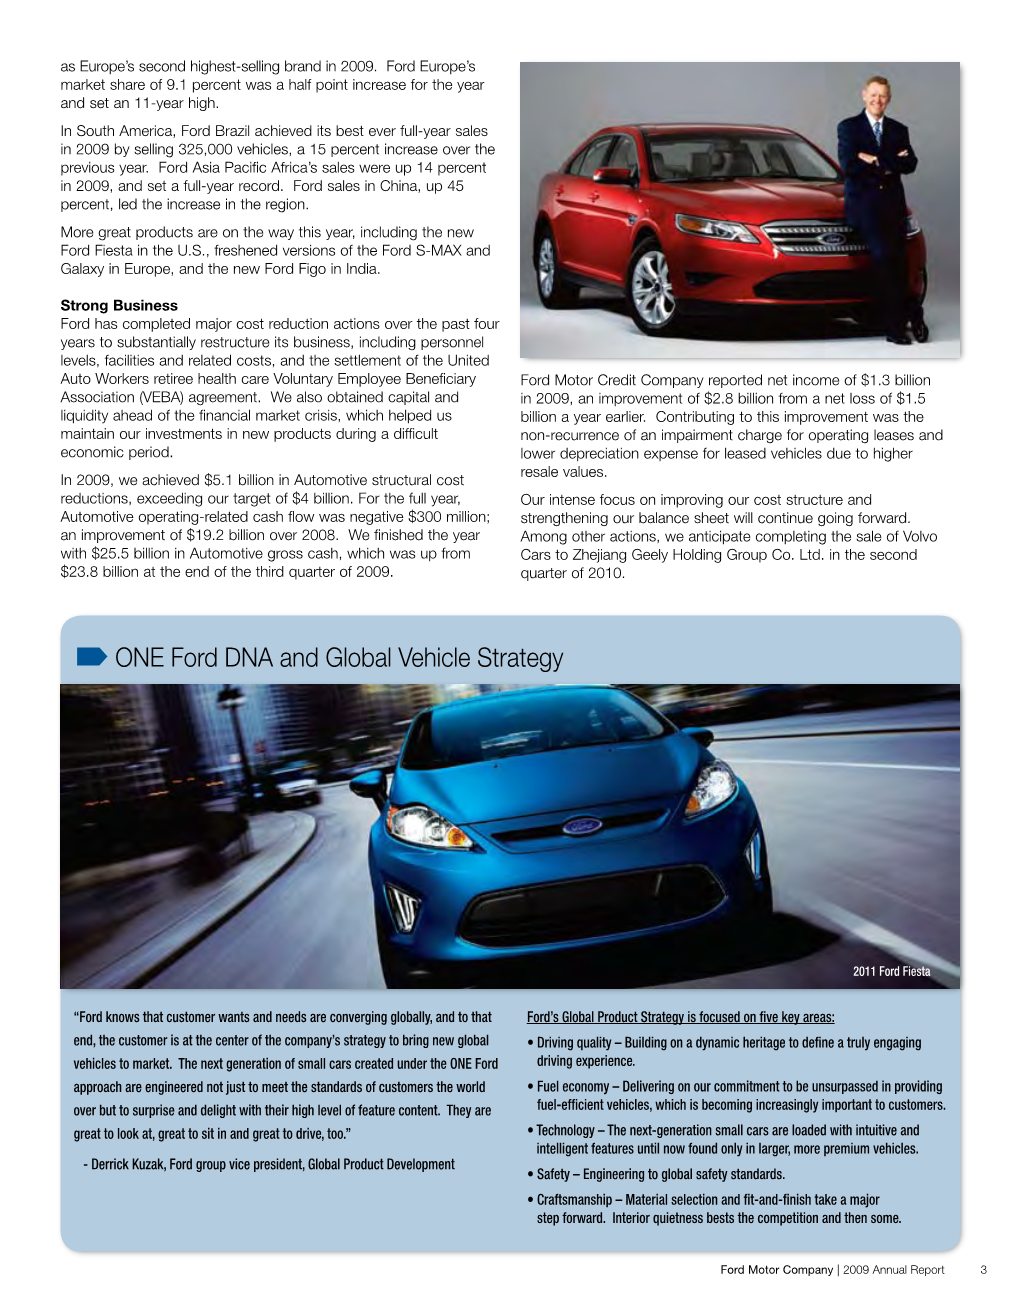 ´ONE Ford DNA and Global Vehicle Strategy